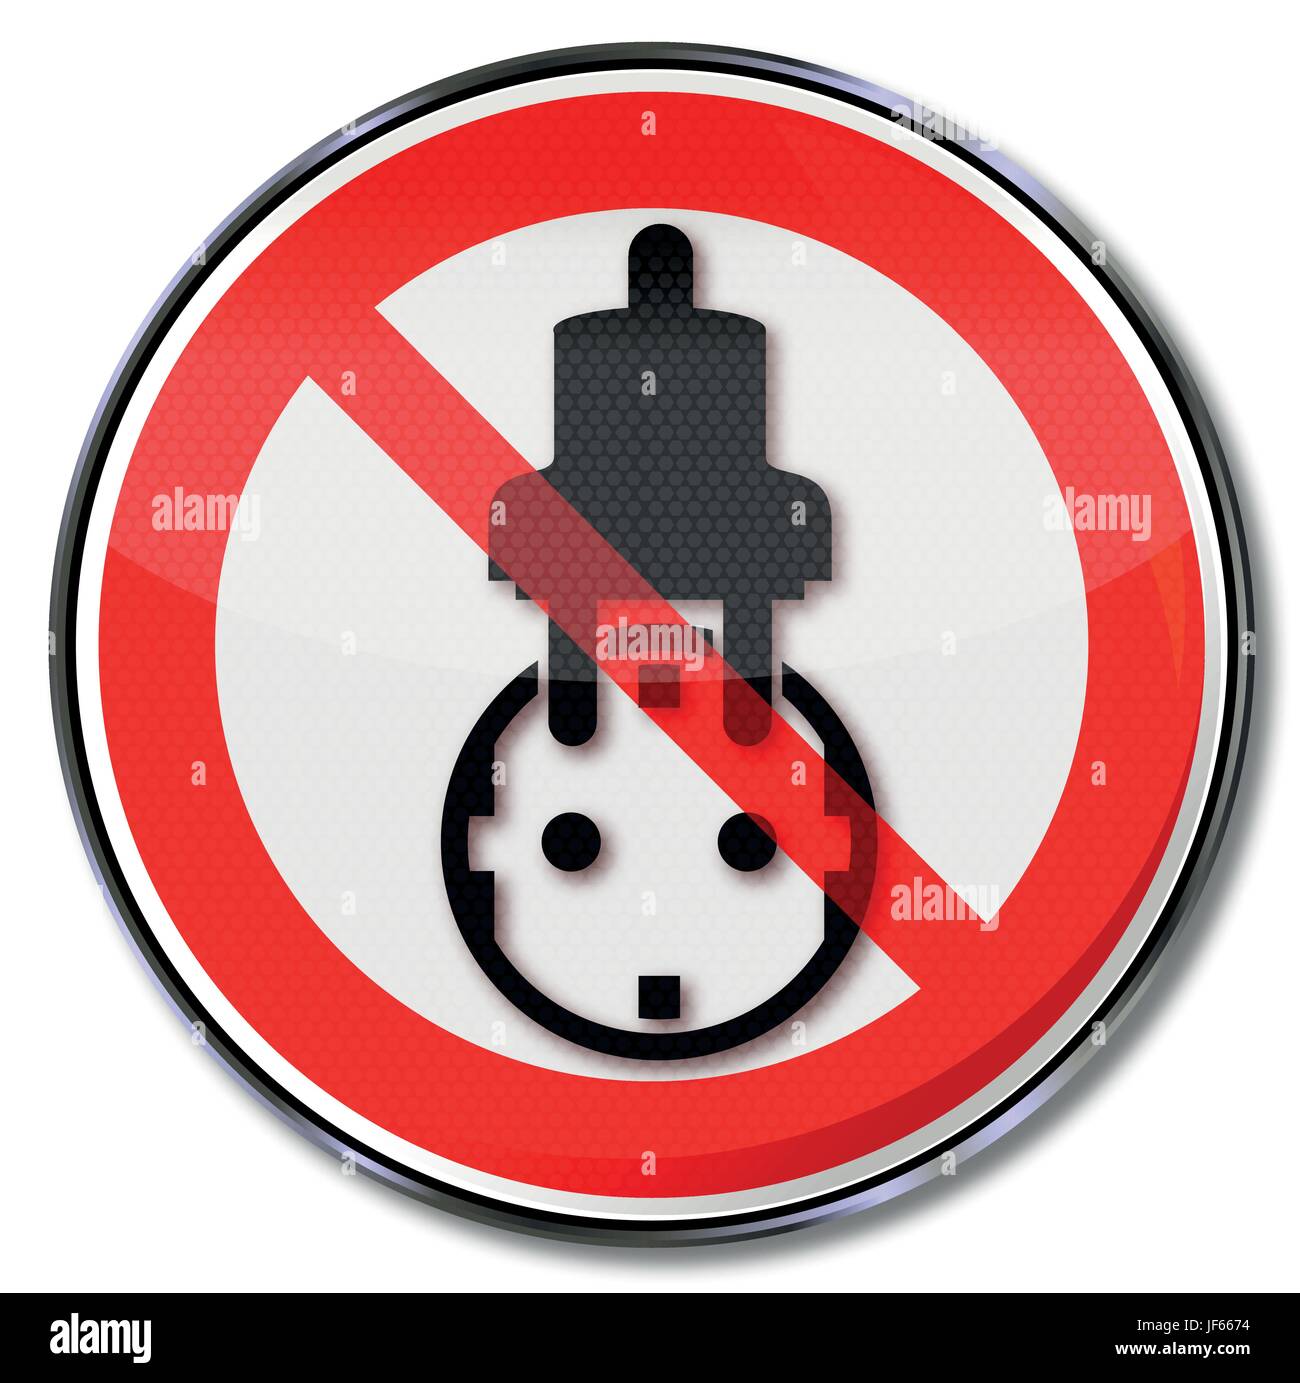 save, ersatz, power saving, squandering, waste, out, industry, euro, save, Stock Vector